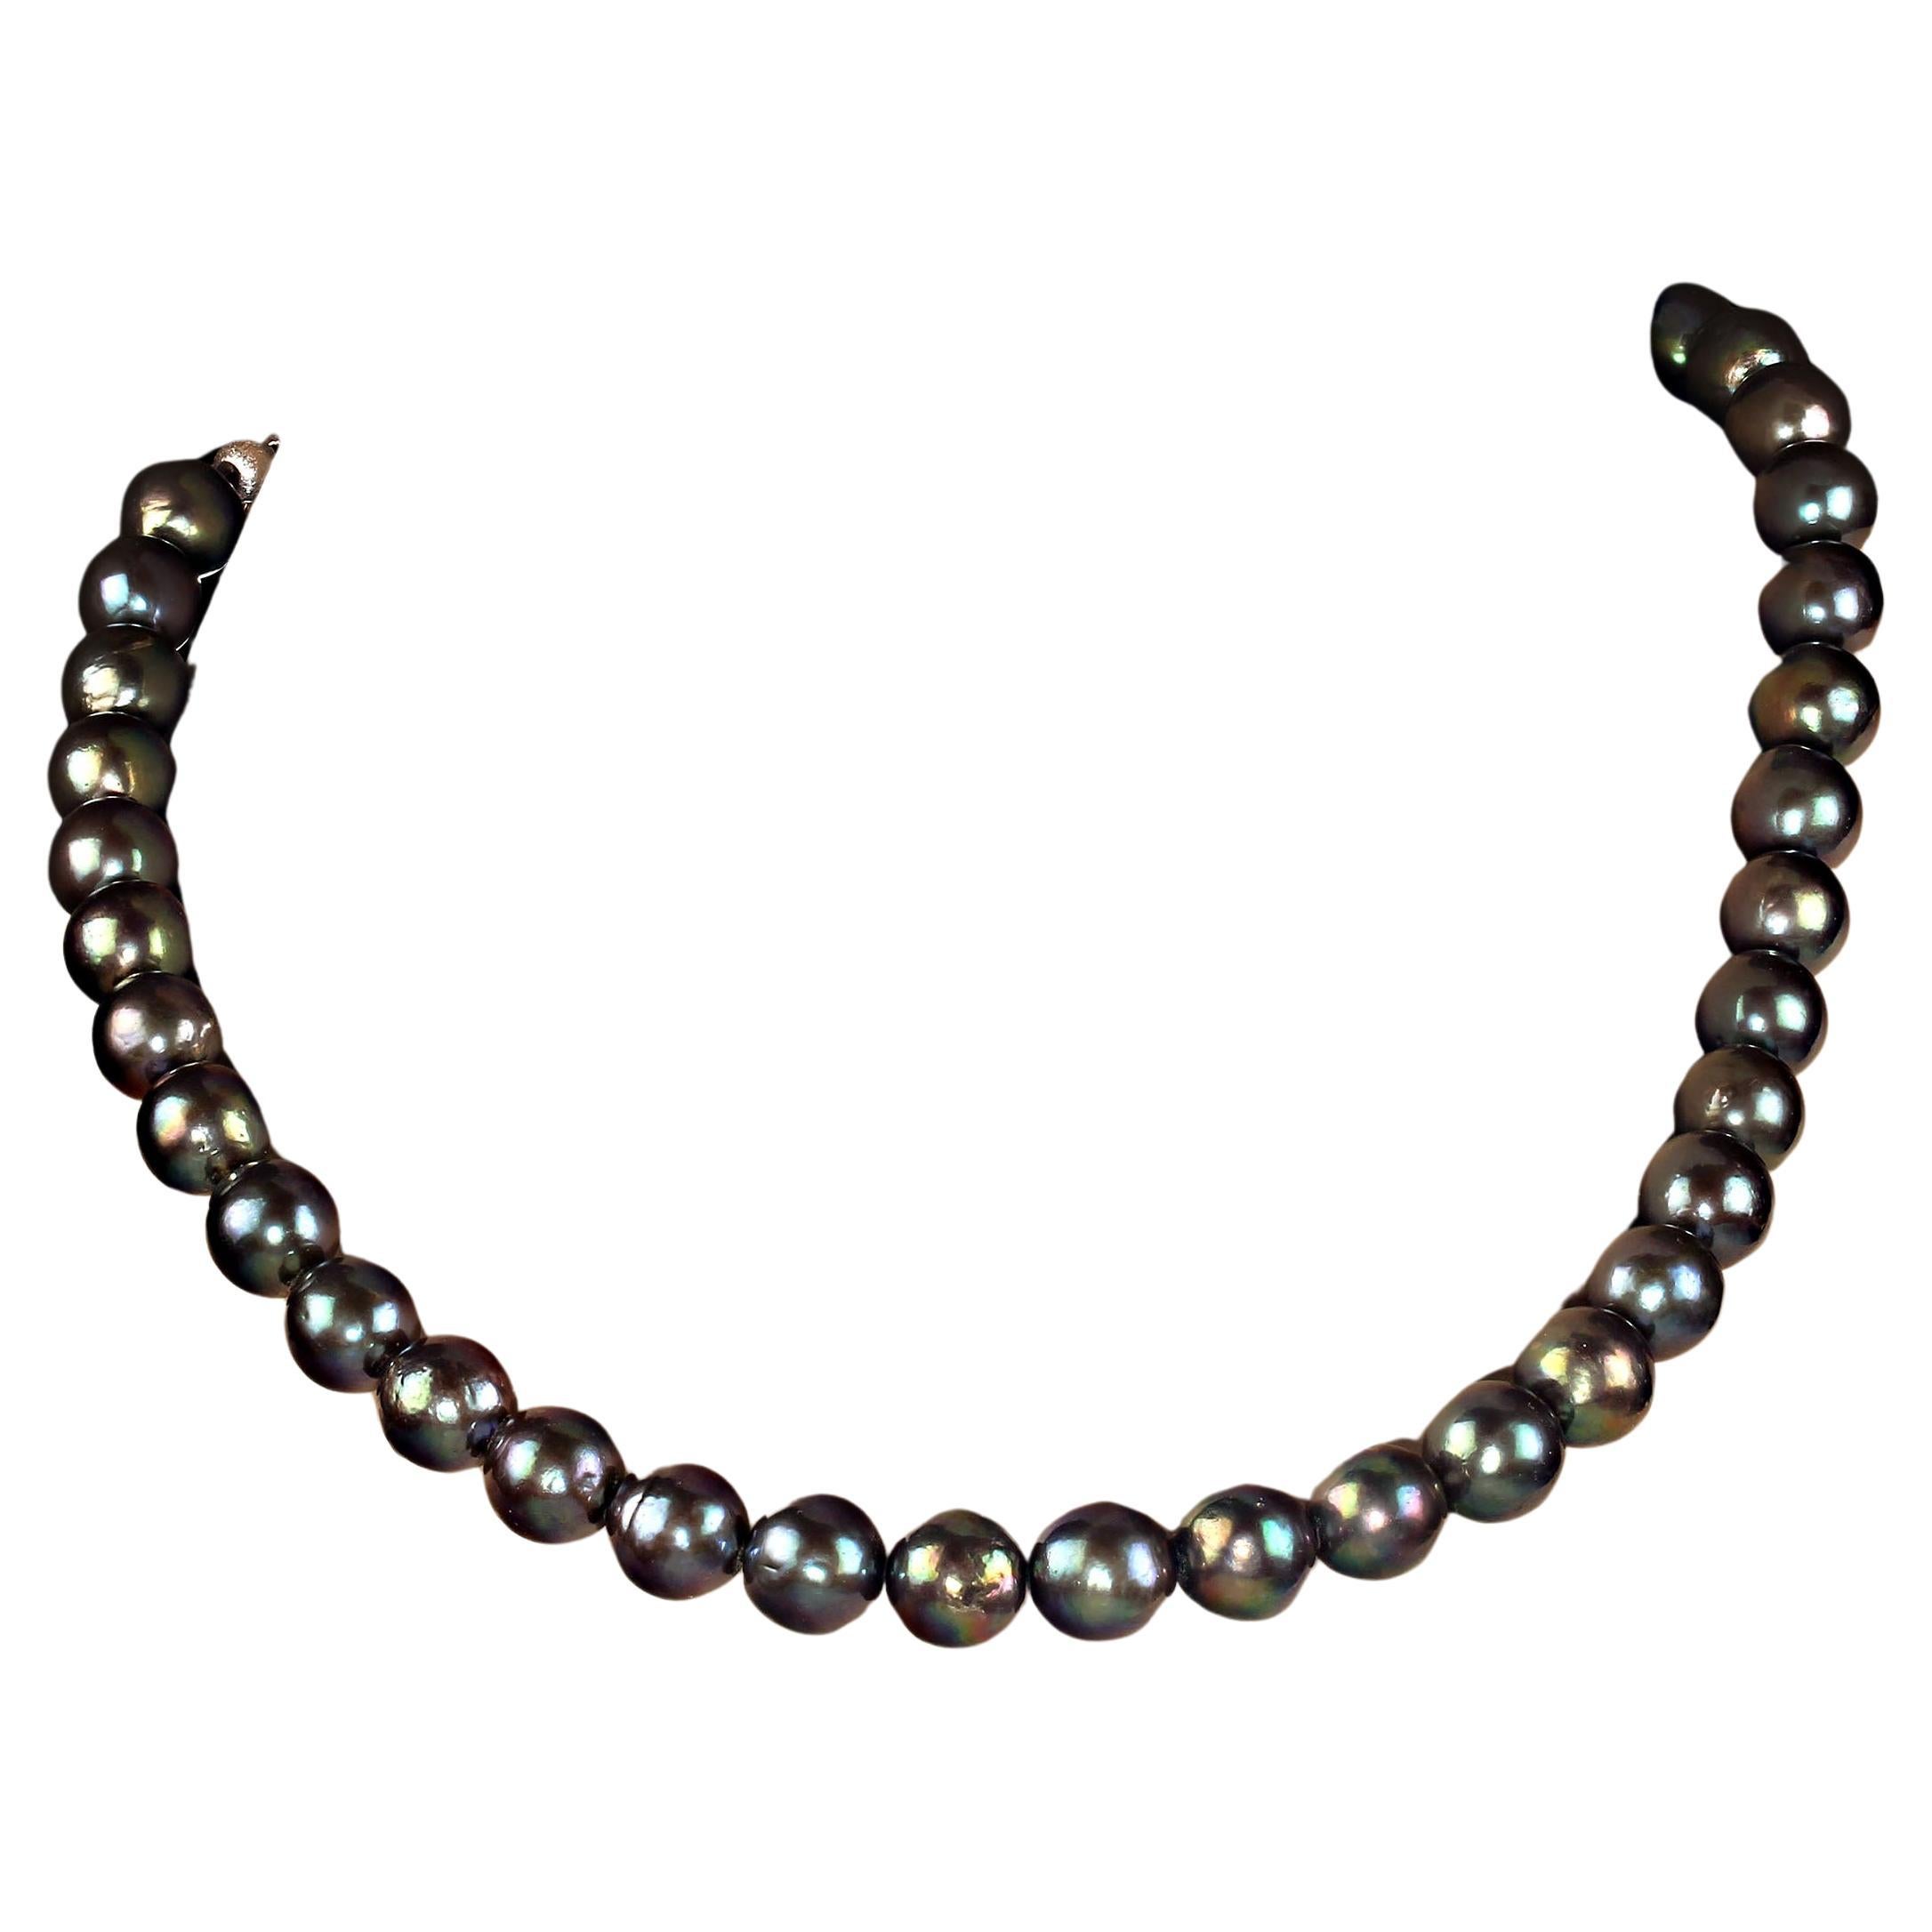 10 mm pearl necklace